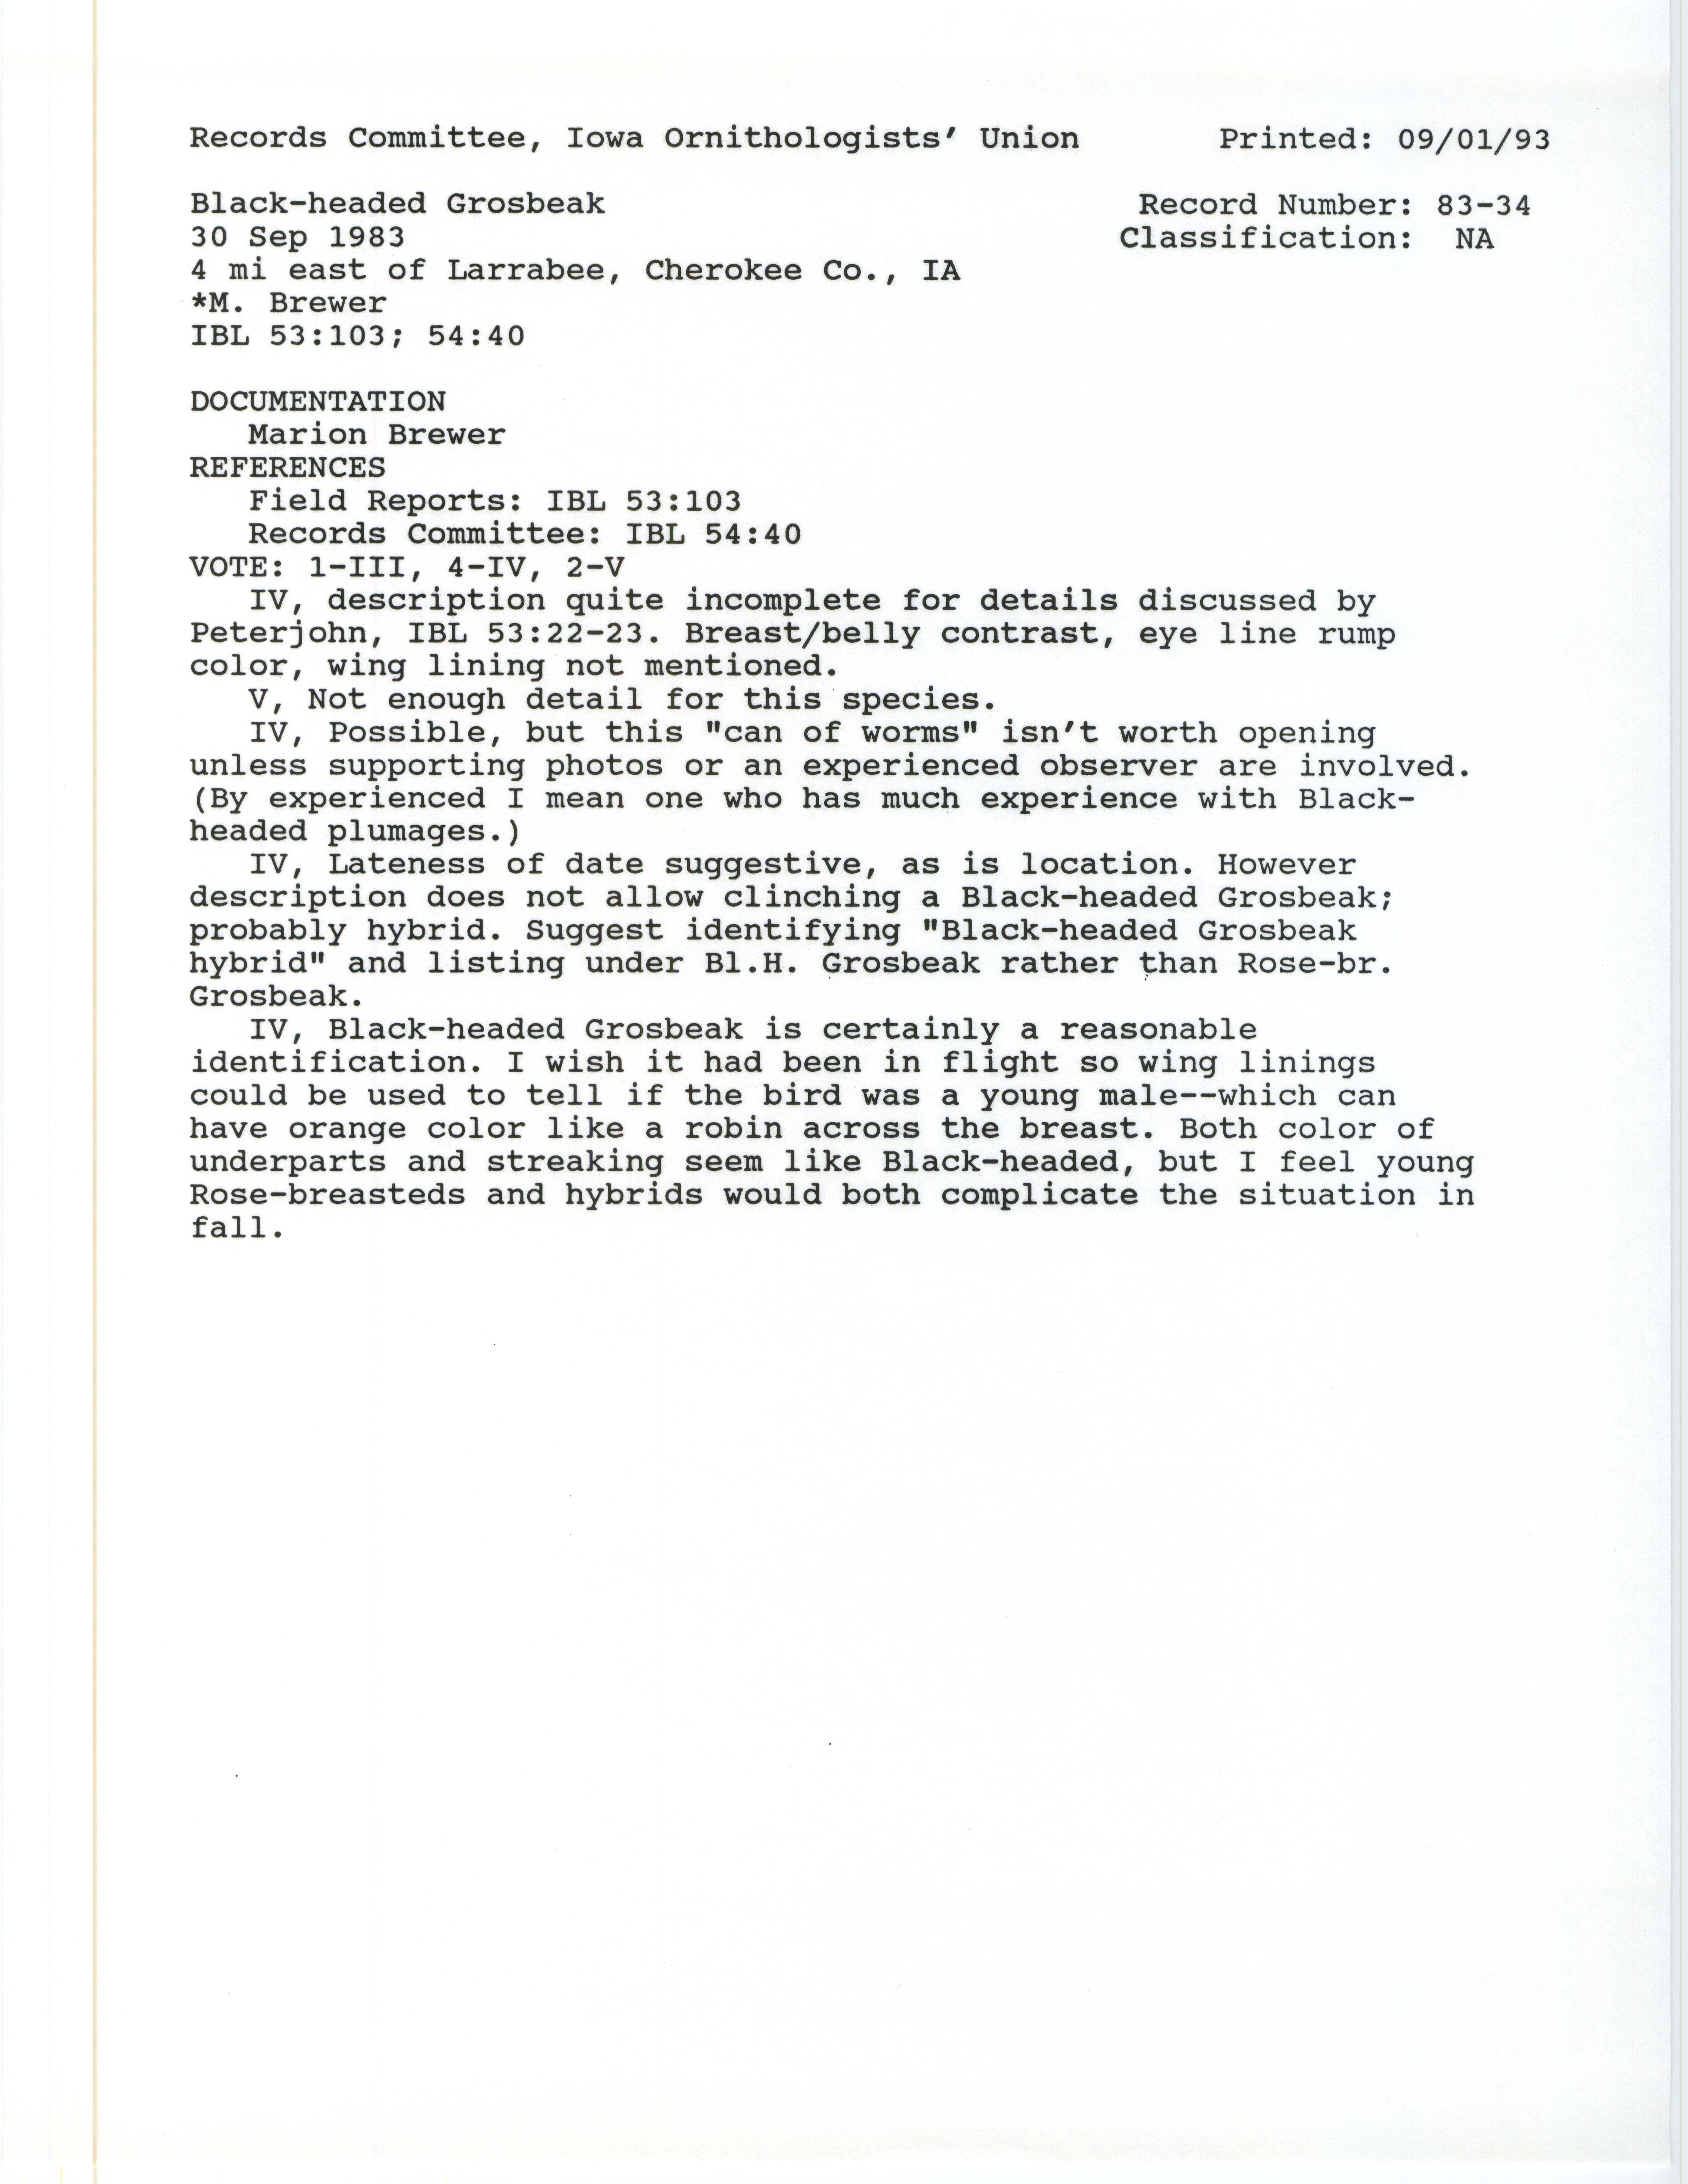 Records Committee review for rare bird sighting for Black-headed Grosbeak at Larrabee, 1983